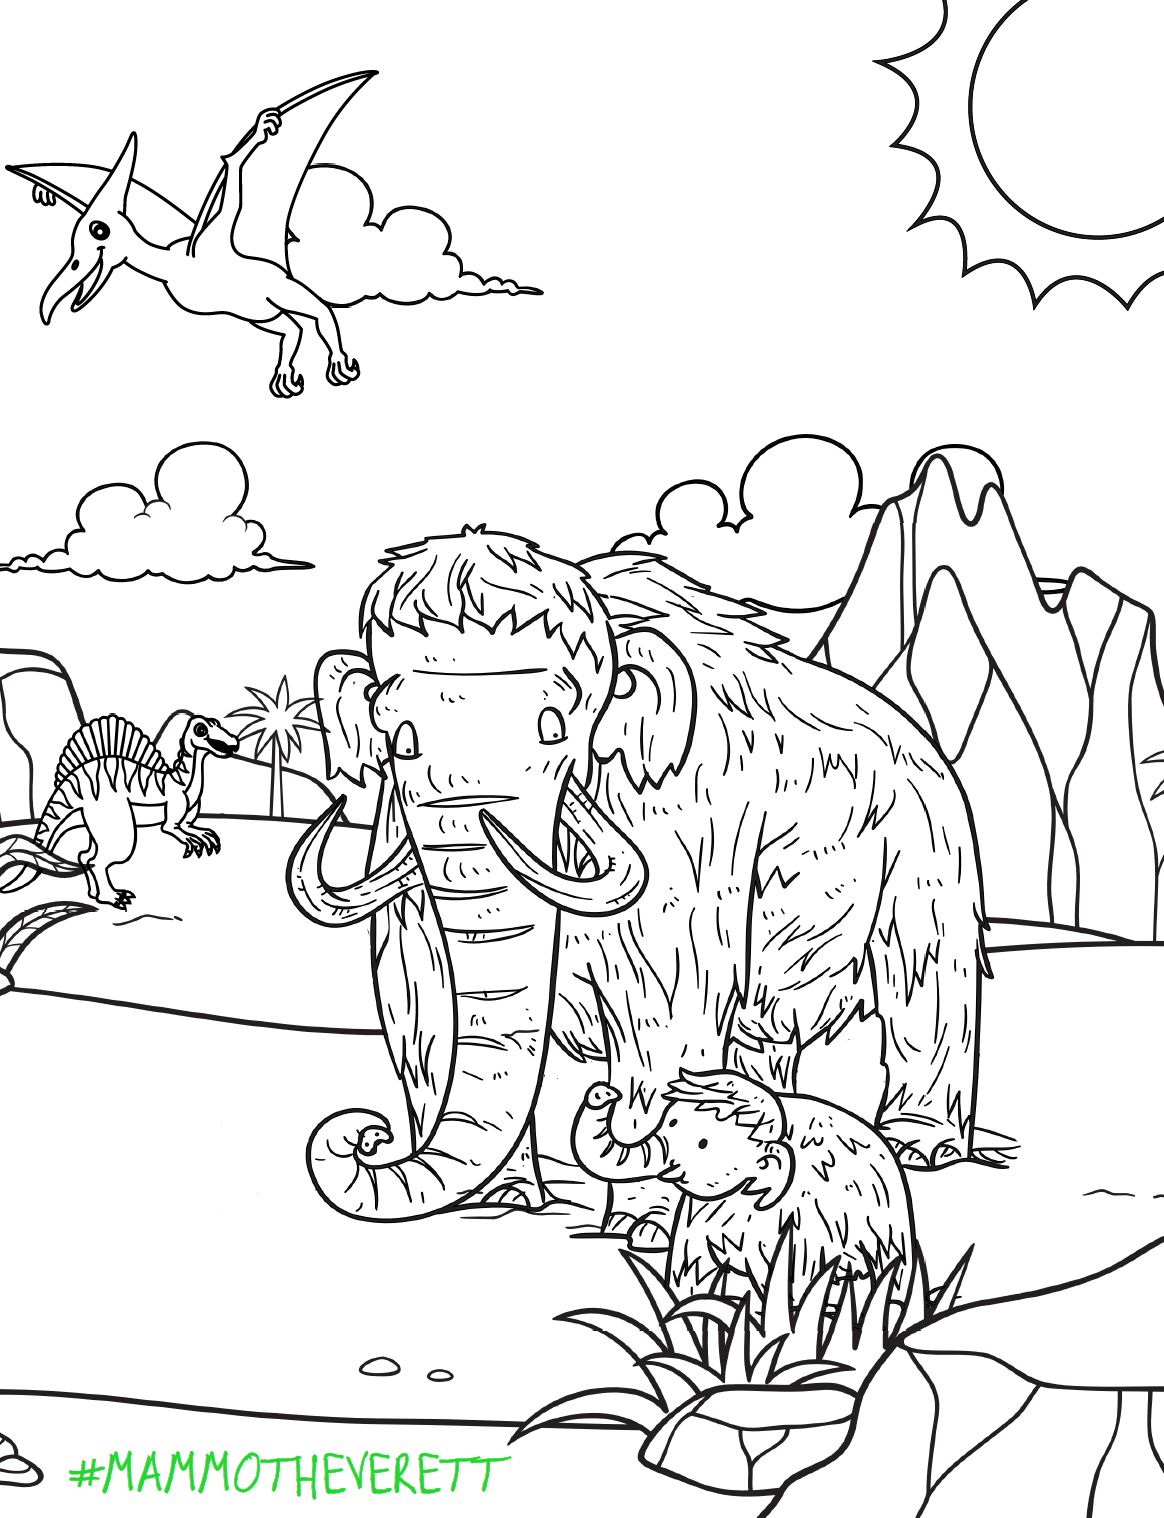 Everett Coloring Page